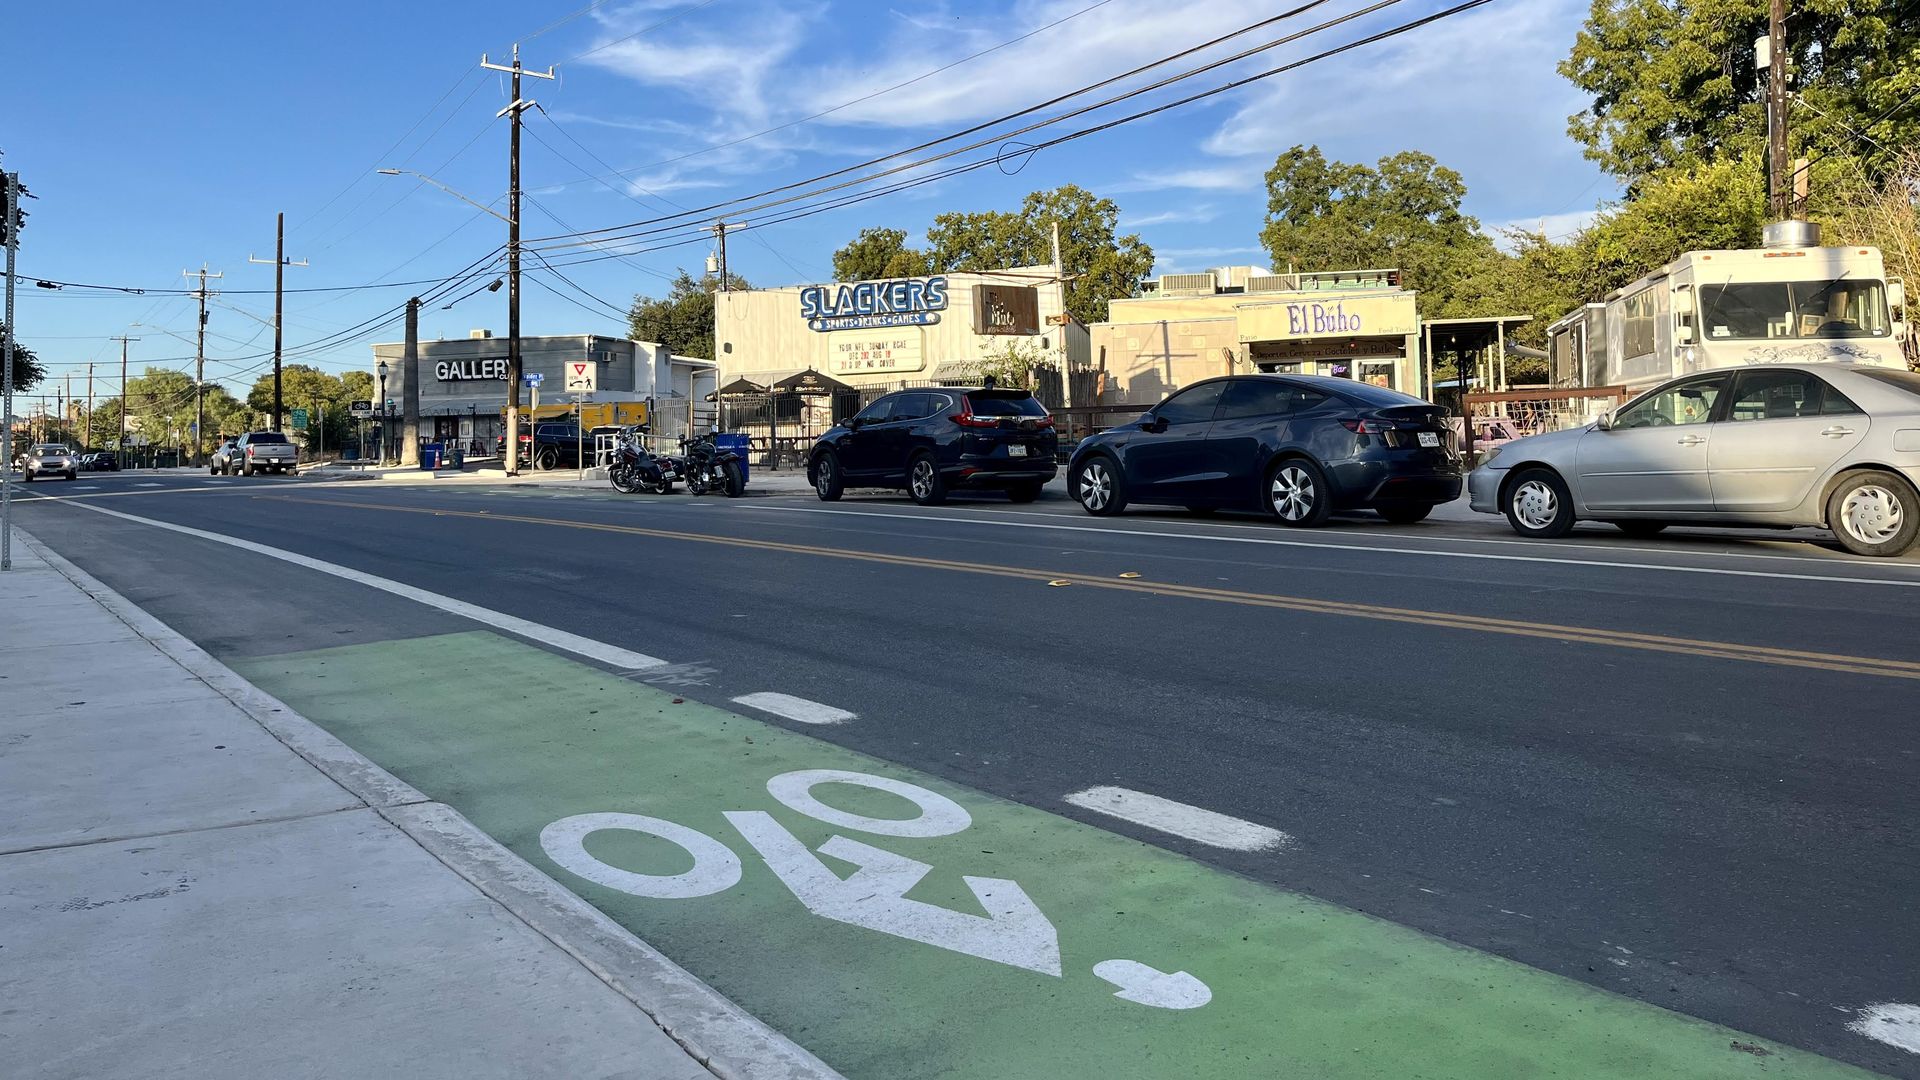 A newly paved street and bike lane in front of bars and on-street parking.